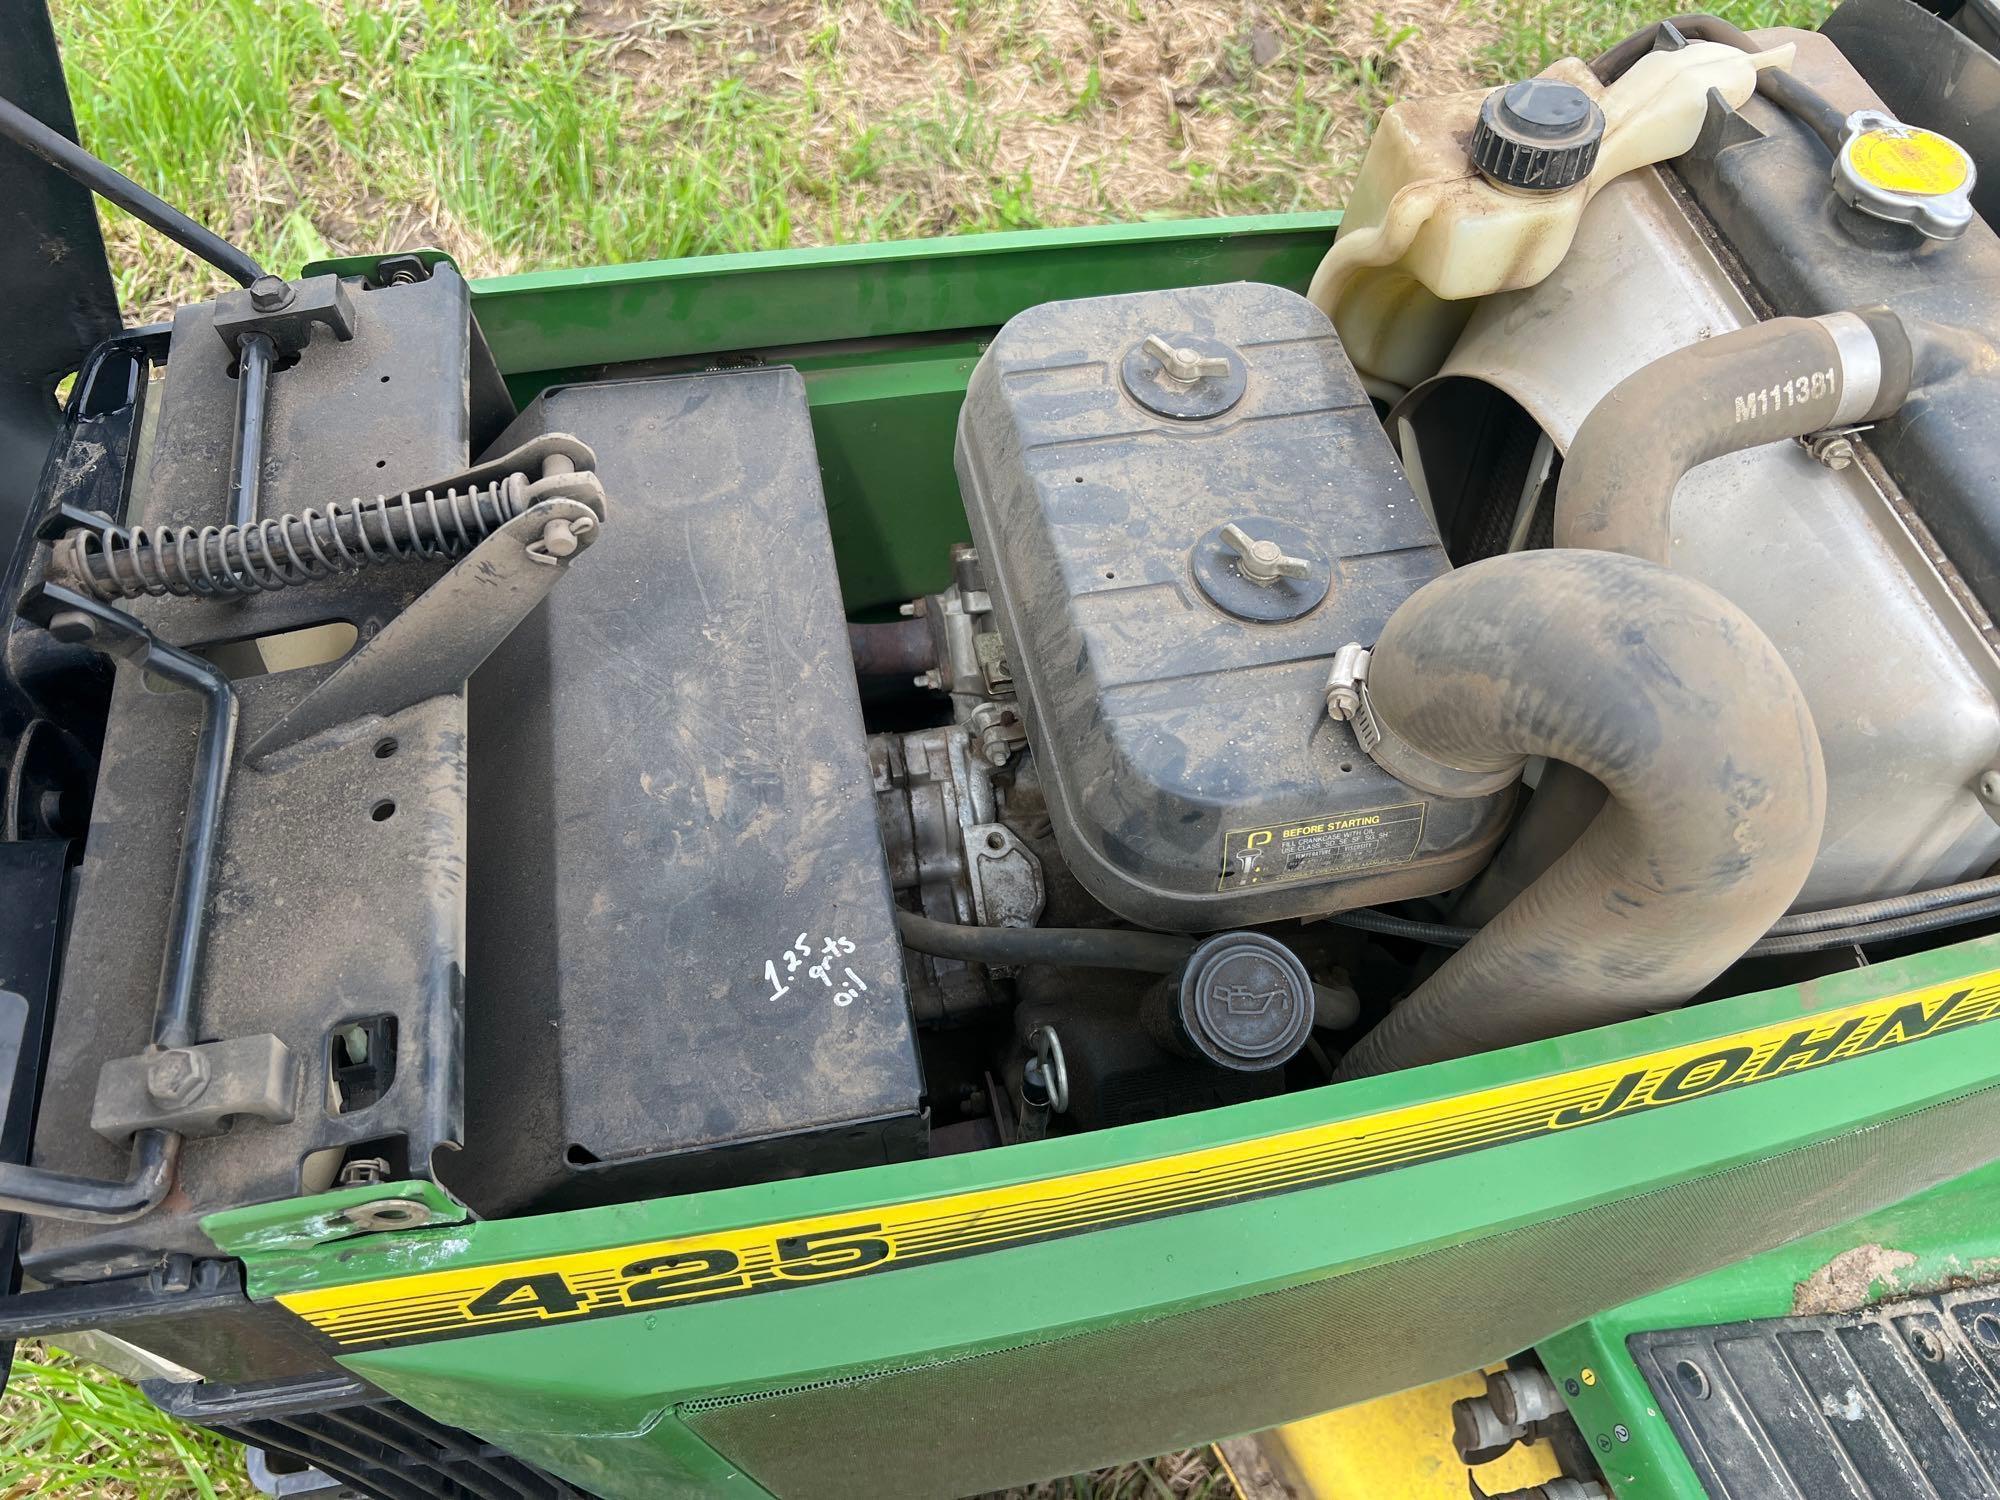 JOHN DEERE 425 LAWN & GARDEN TRACTOR powered by gas engine, equipped with 48in. Cutting deck.